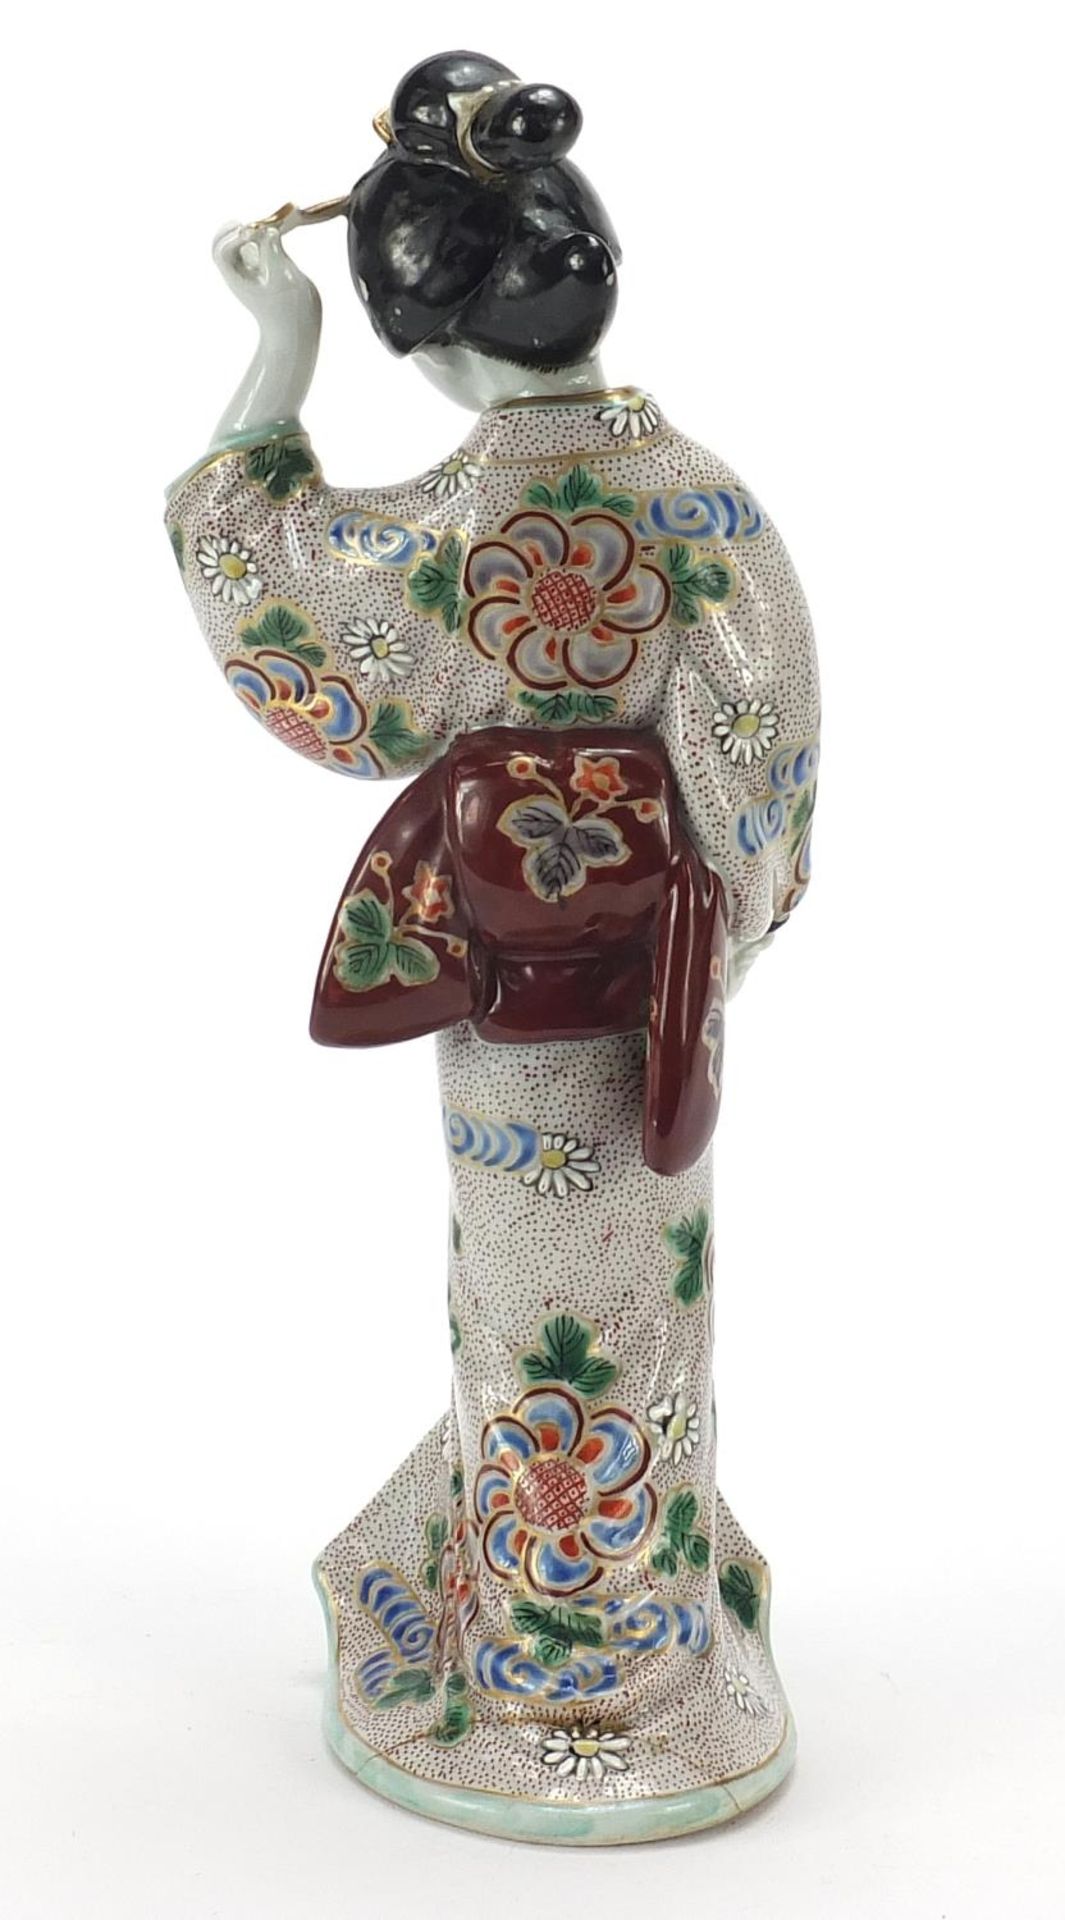 Japanese porcelain figure of a Geisha girl playing with her hair, 32cm high - Image 4 of 8